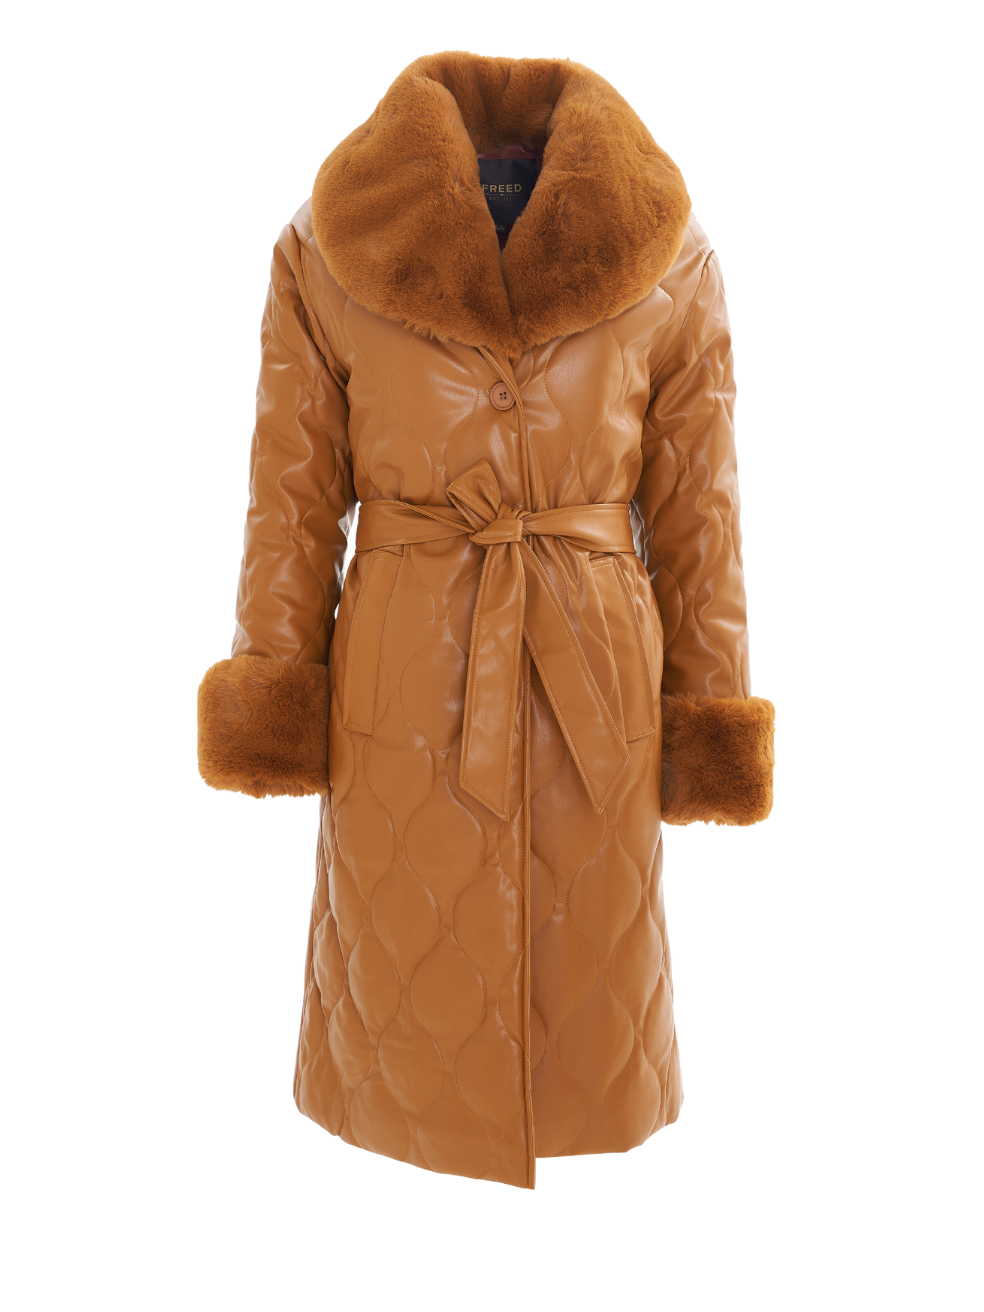 Carrie Spice Made in Canada Vegan Leather Coat with Faux Fur Belt Cold Weather Outerwear